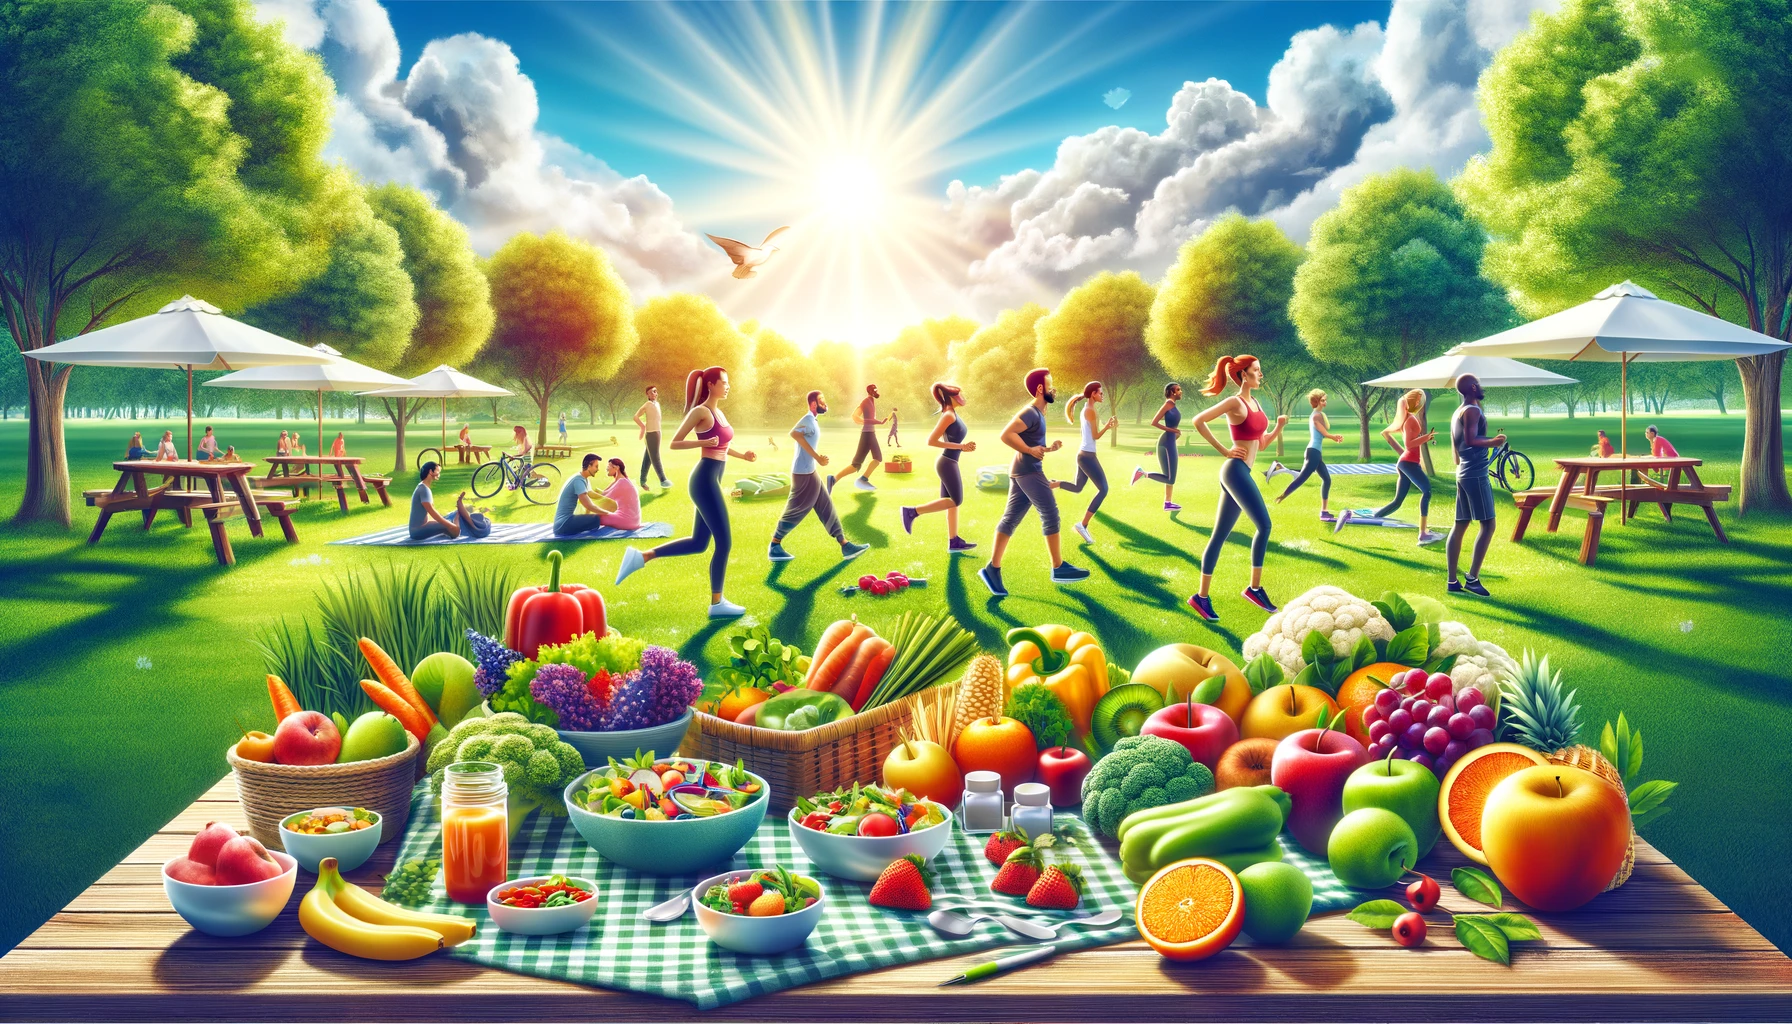 Diverse people engaging in outdoor exercises and enjoying healthy foods, featured on 